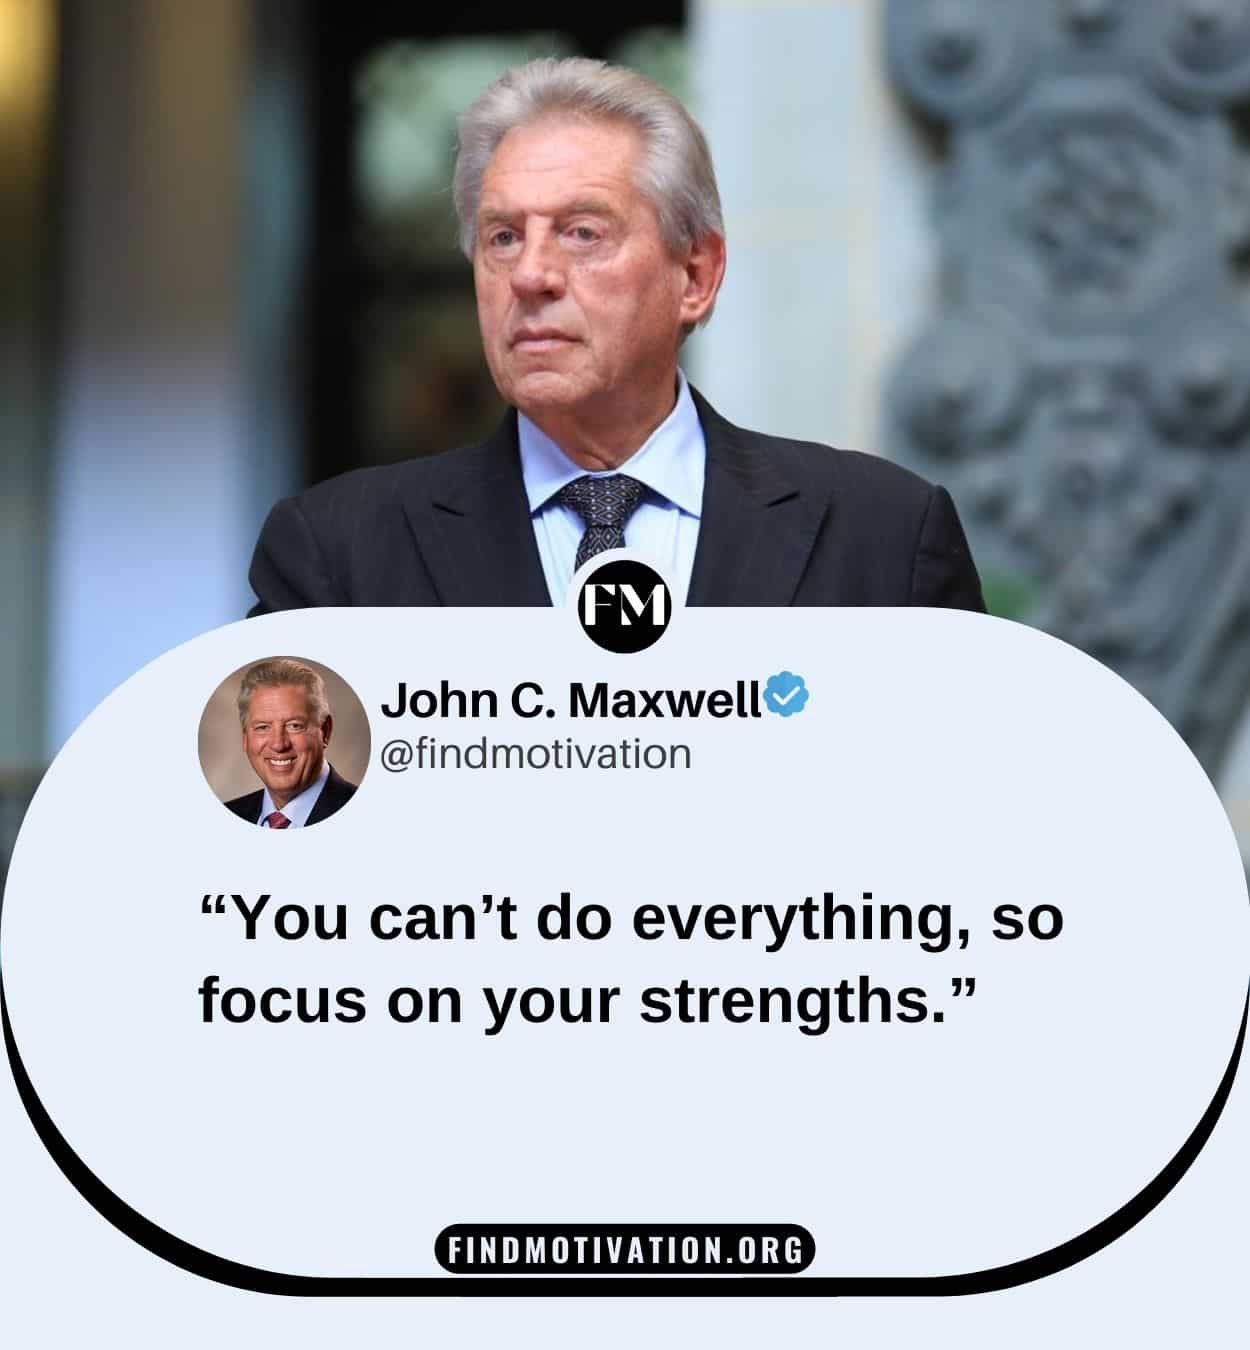 John C Maxwell Self-Improvement Quotes to change yourself and become the better version of yourself